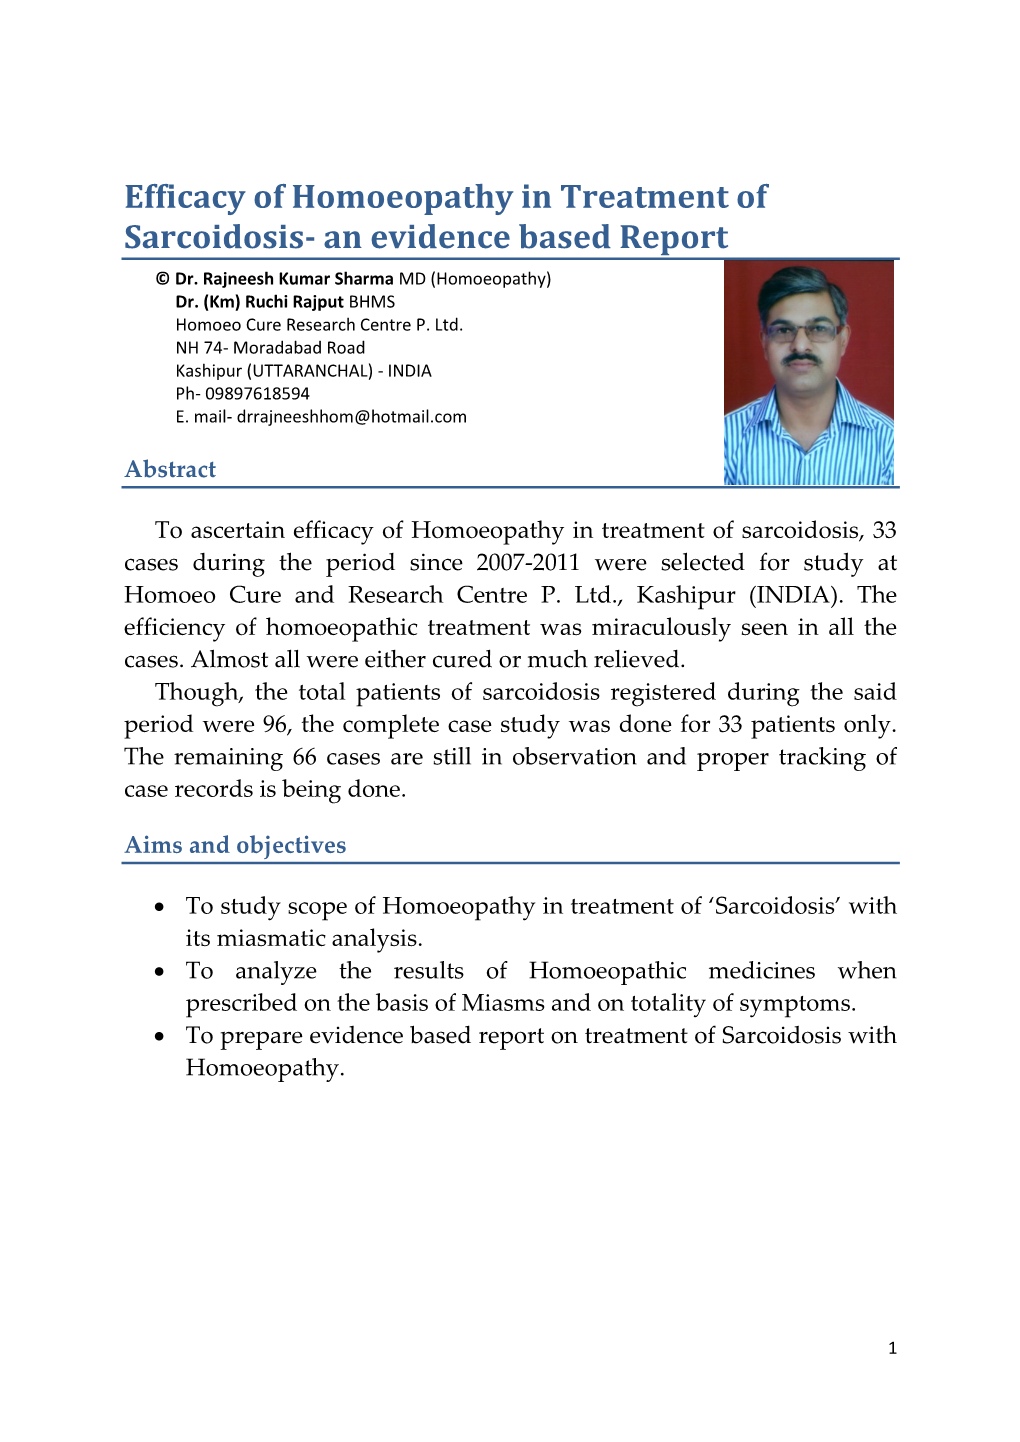 Efficacy of Homoeopathy in Treatment of Sarcoidosis- an Evidence Based Report © Dr